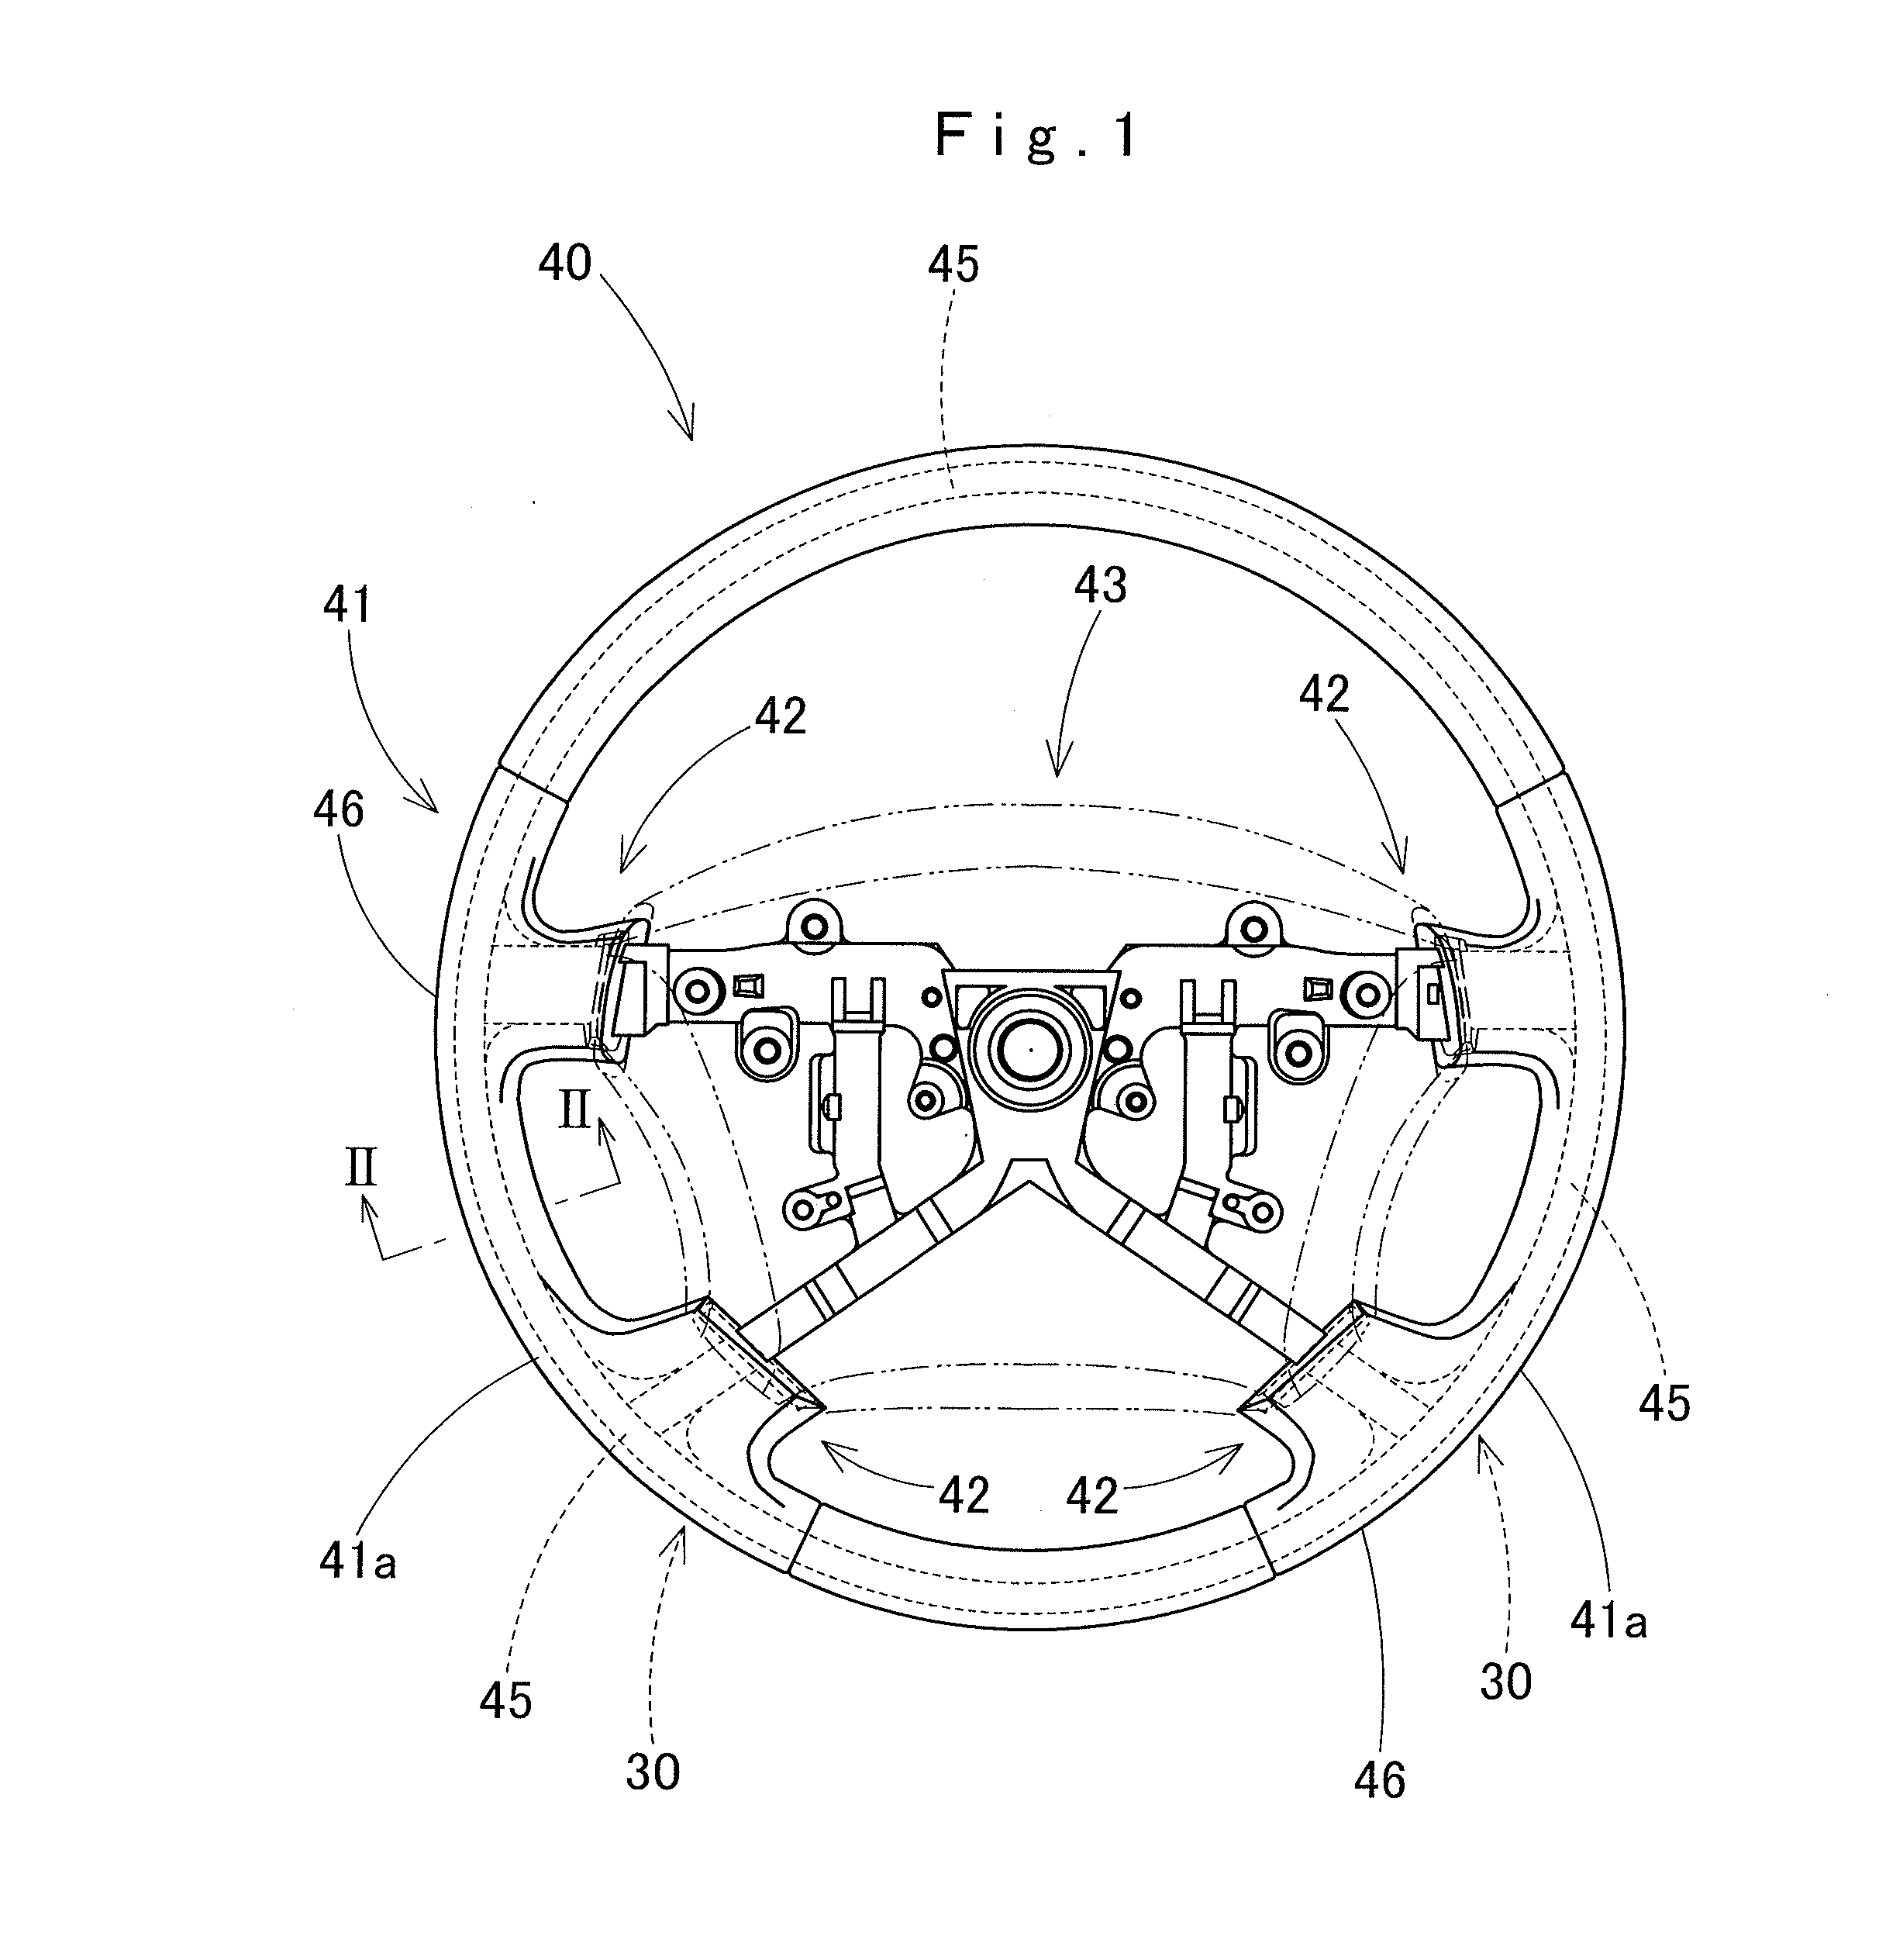 Heater element and steering wheel